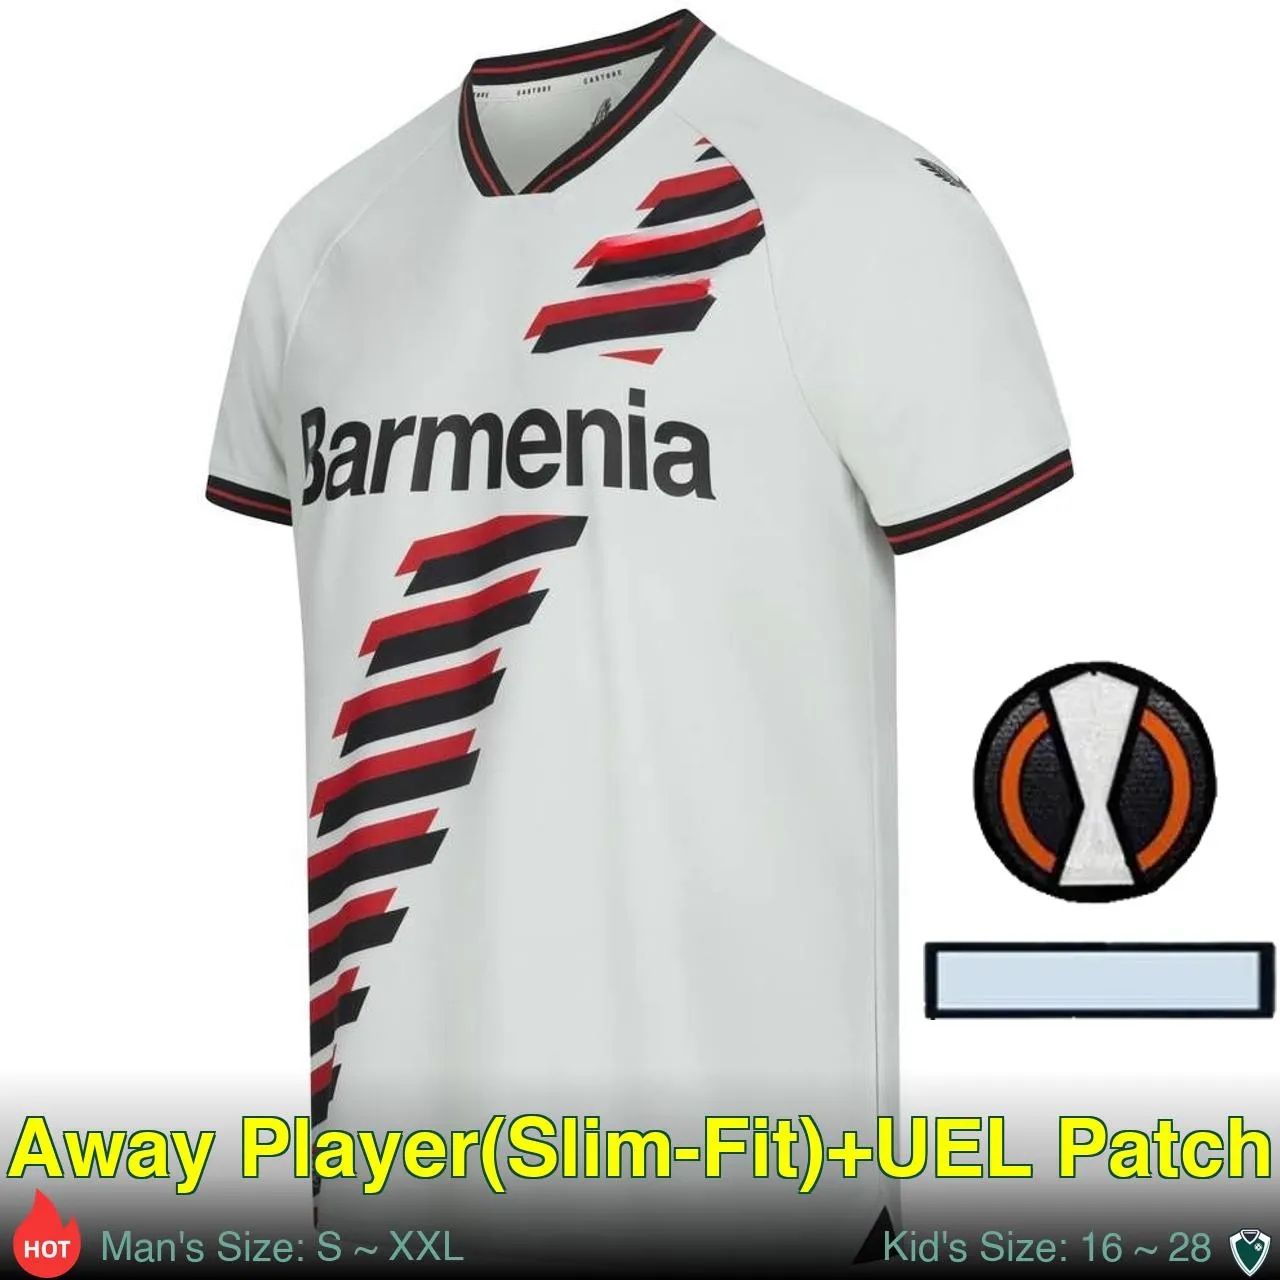 Away Player+UEL Patch